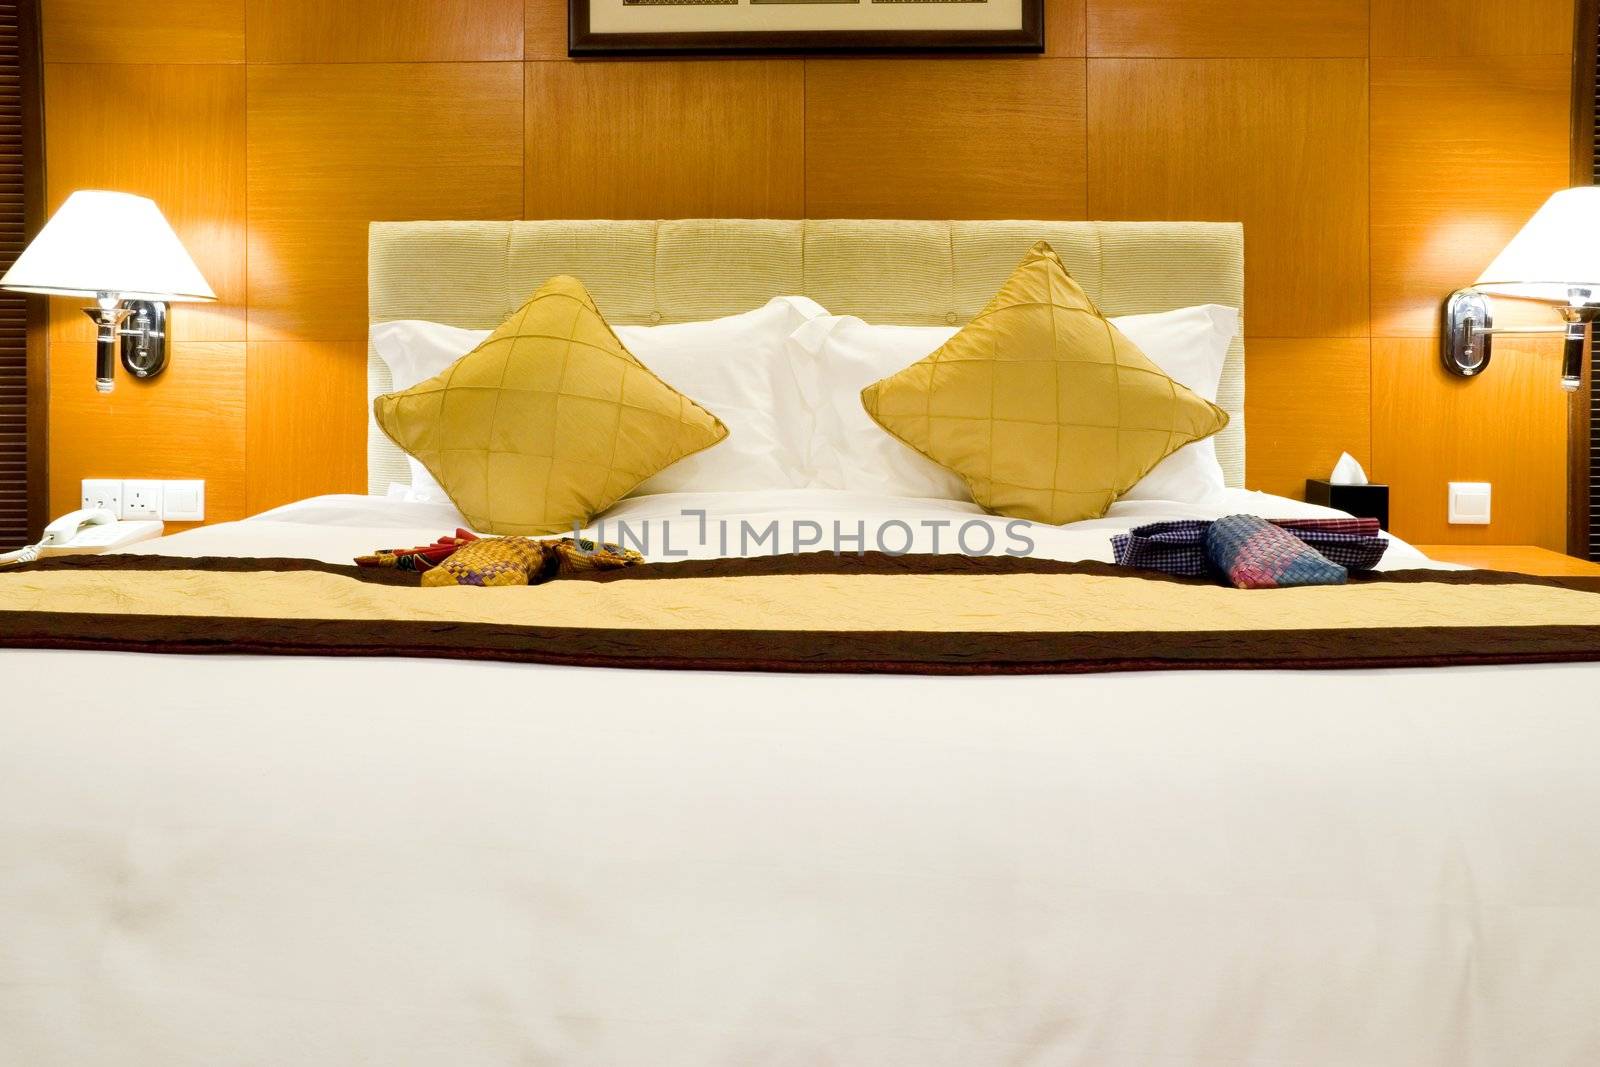 Image of a comfortable looking hotel bed.